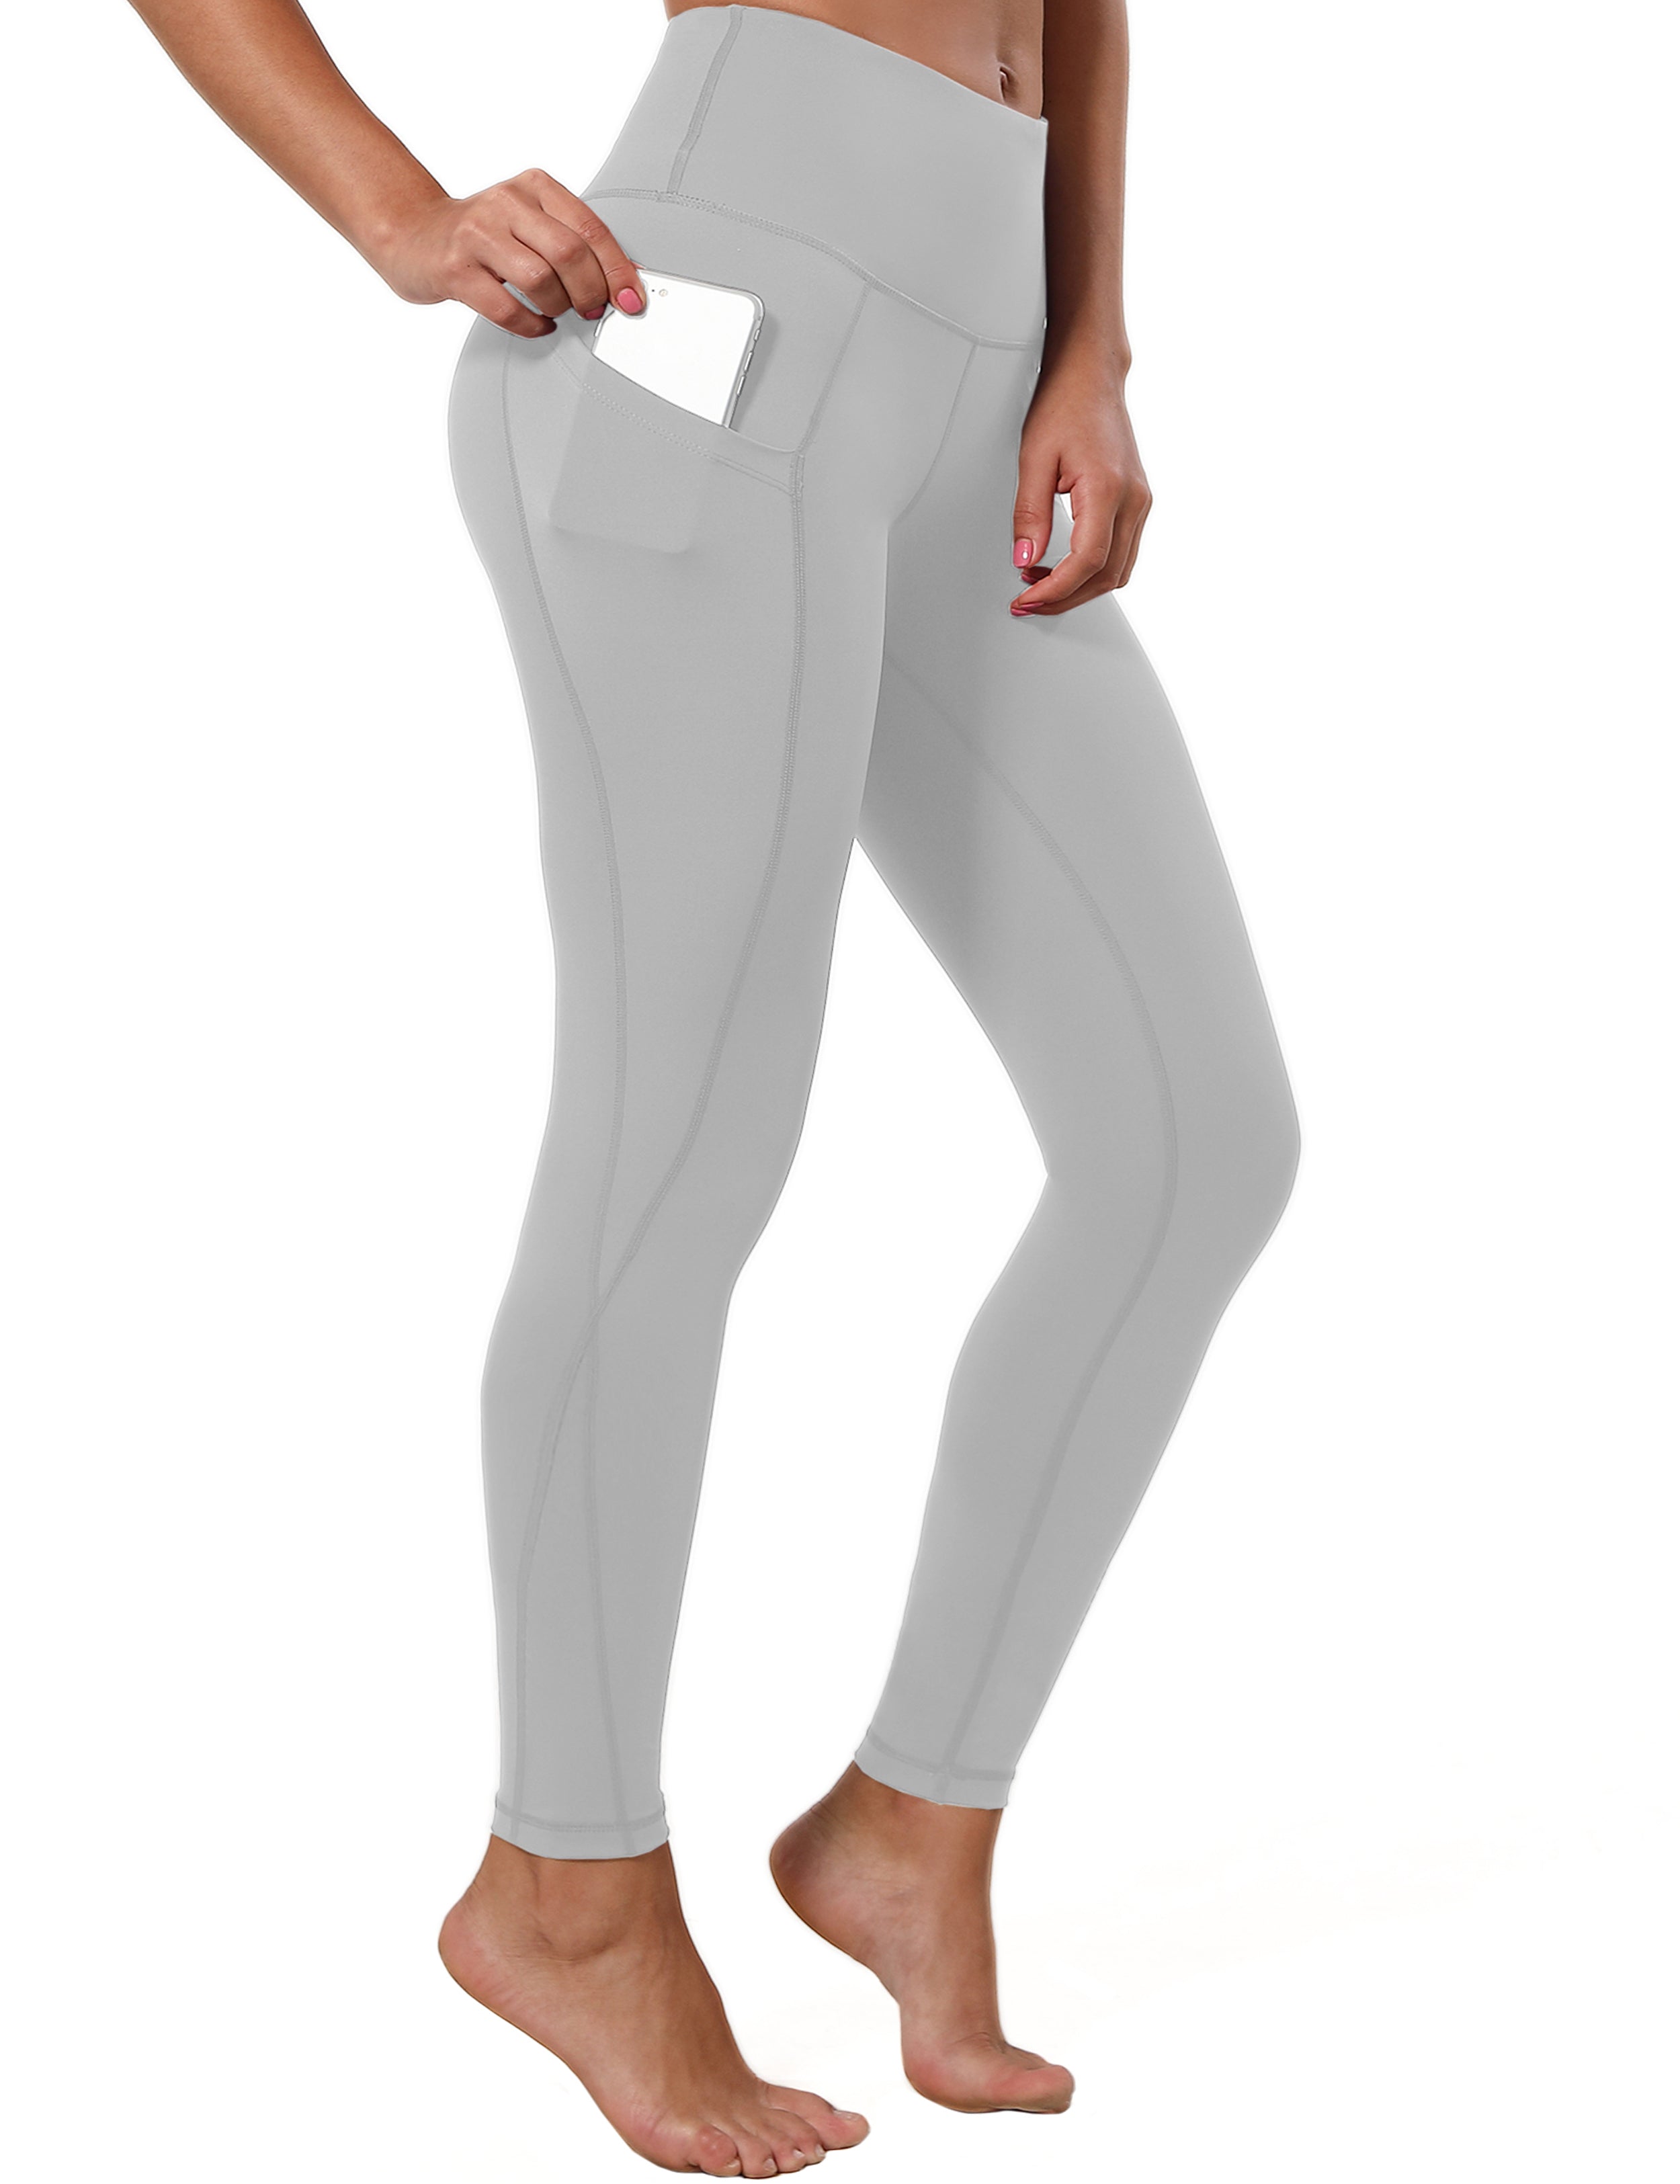 High Waist Side Pockets Pilates Pants lightgray 75% Nylon, 25% Spandex Fabric doesn't attract lint easily 4-way stretch No see-through Moisture-wicking Tummy control Inner pocket